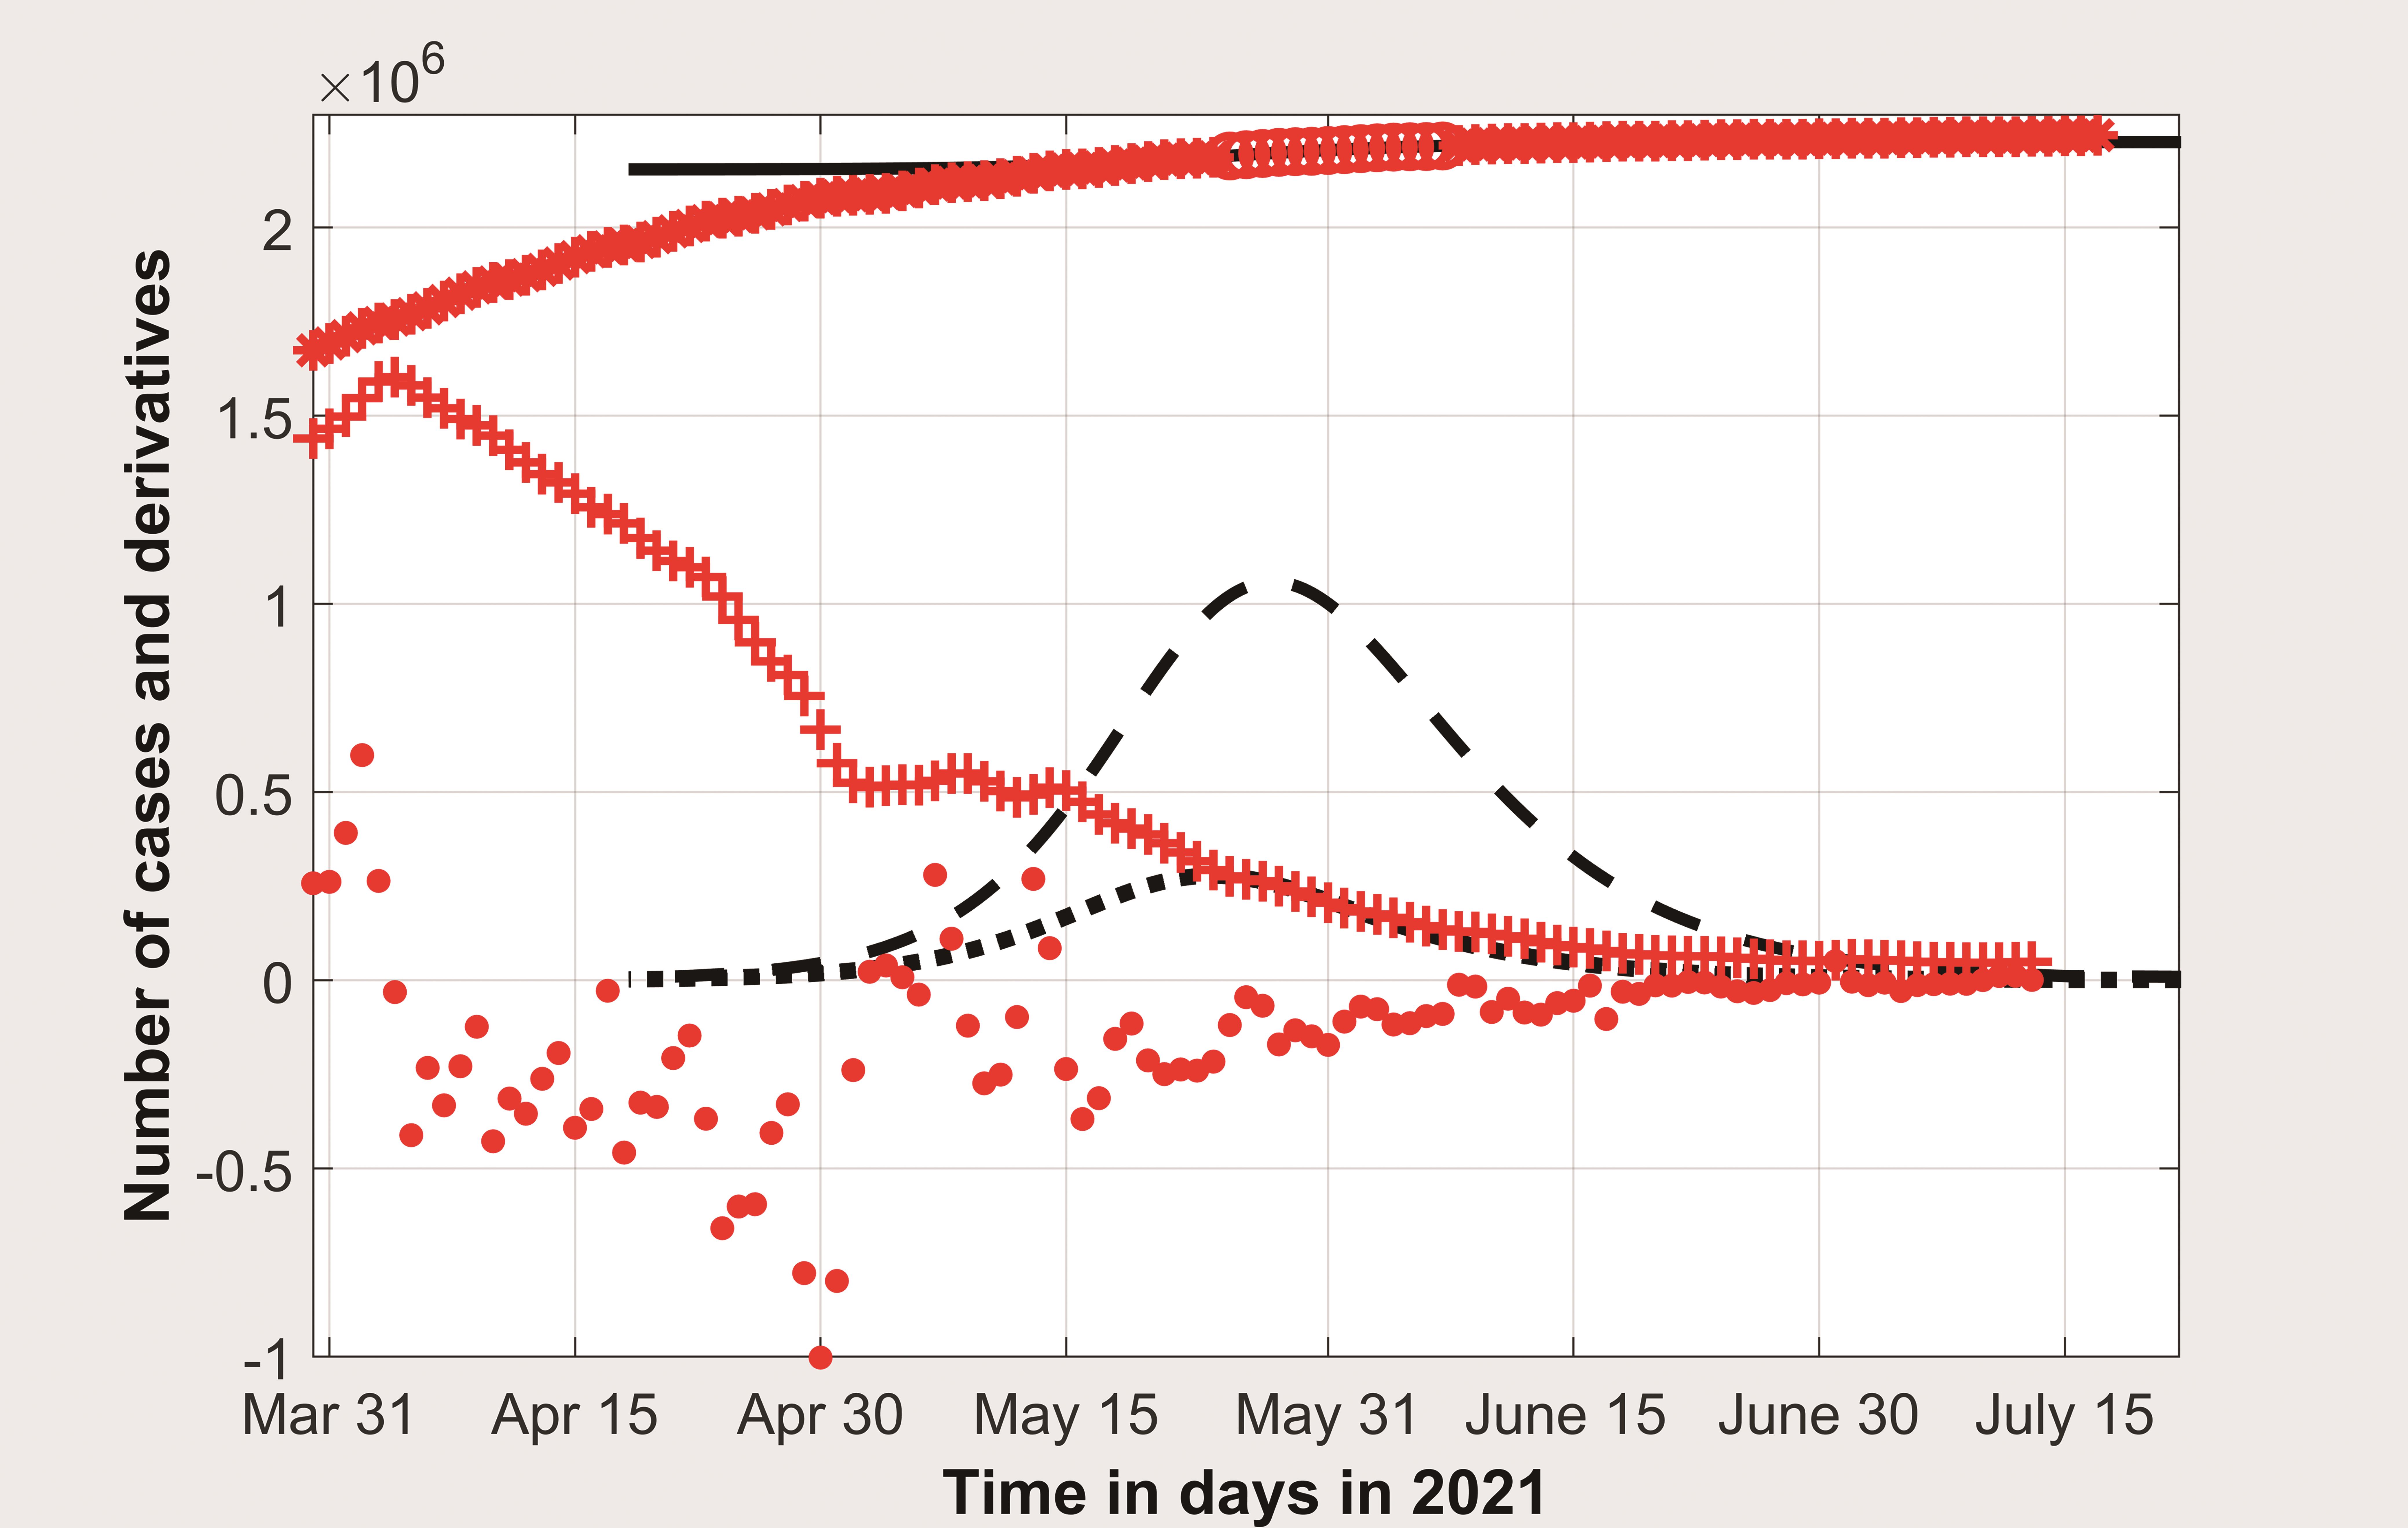 Visible COVID-19 epidemic dynamics in Ukraine in the spring and summer of 2021.